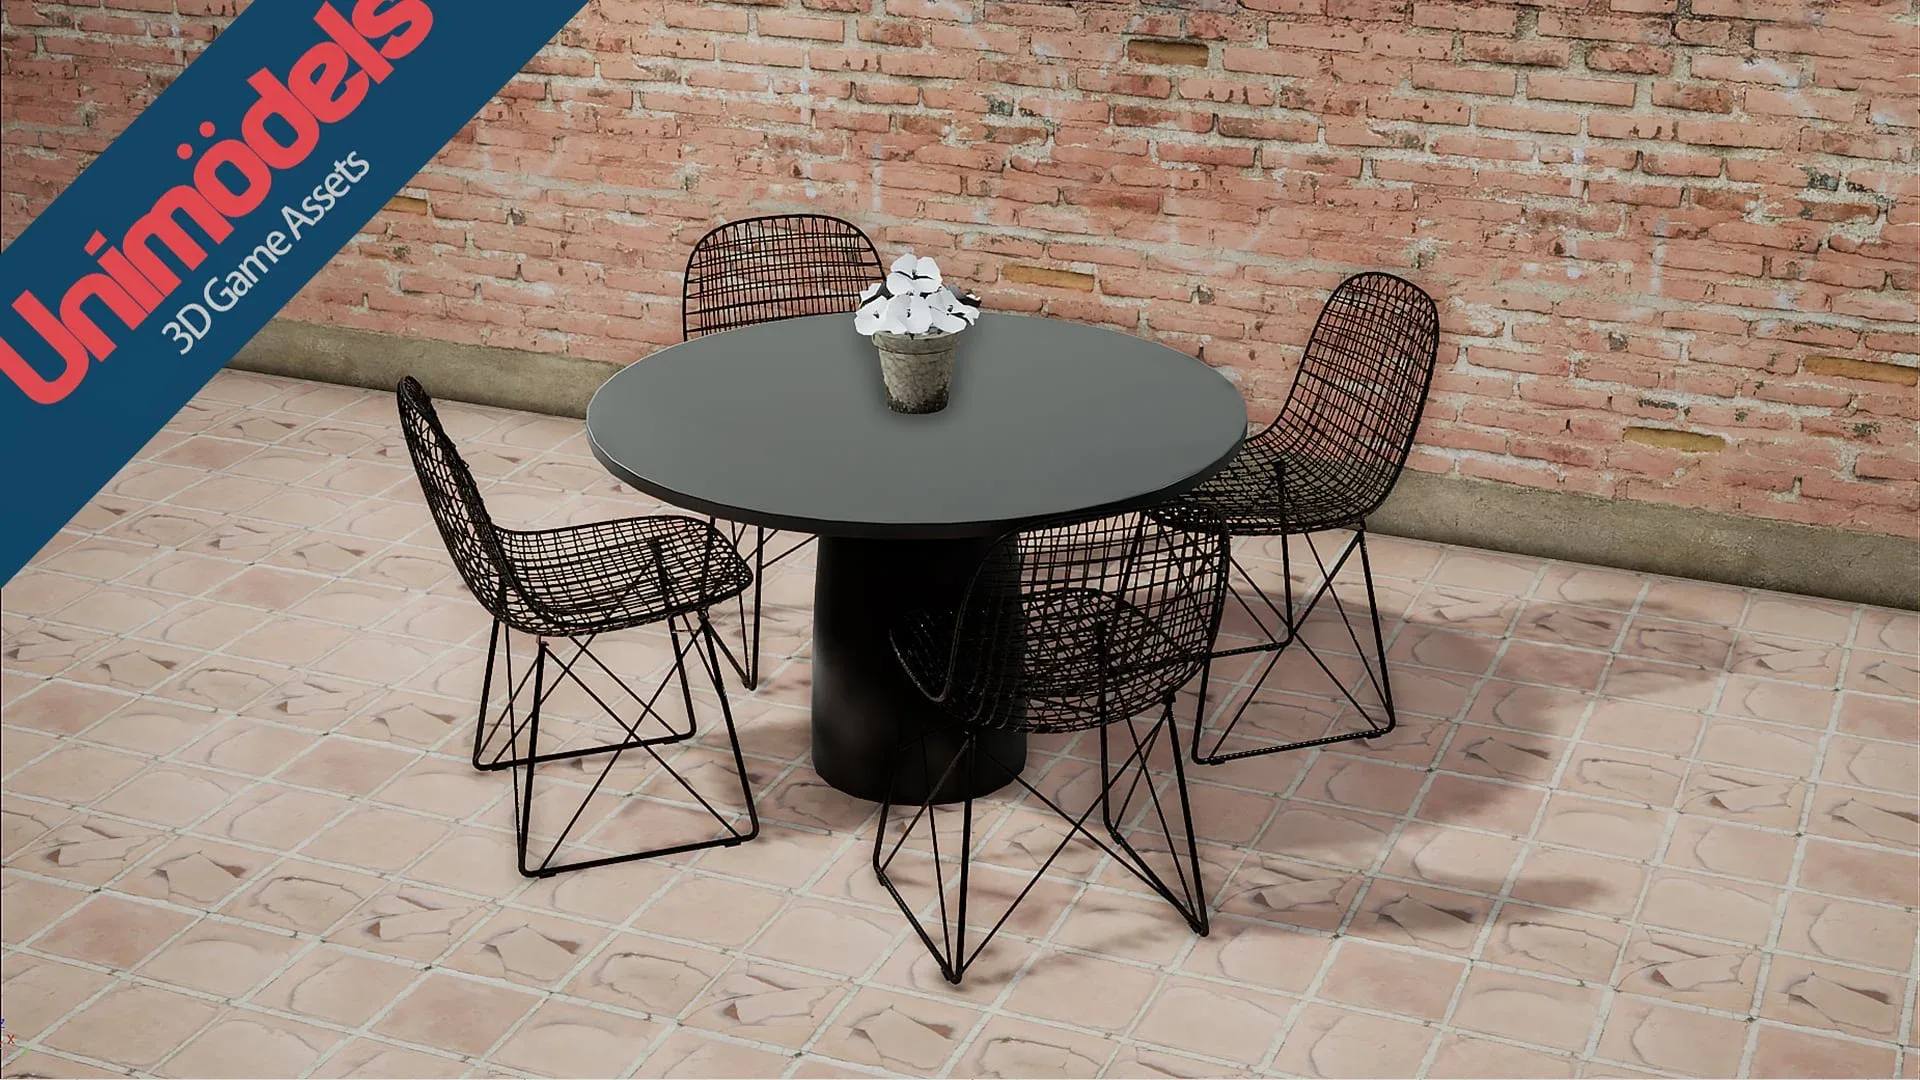 Unimodels Exterior Tables & Chairs Vol. 1 for UE4